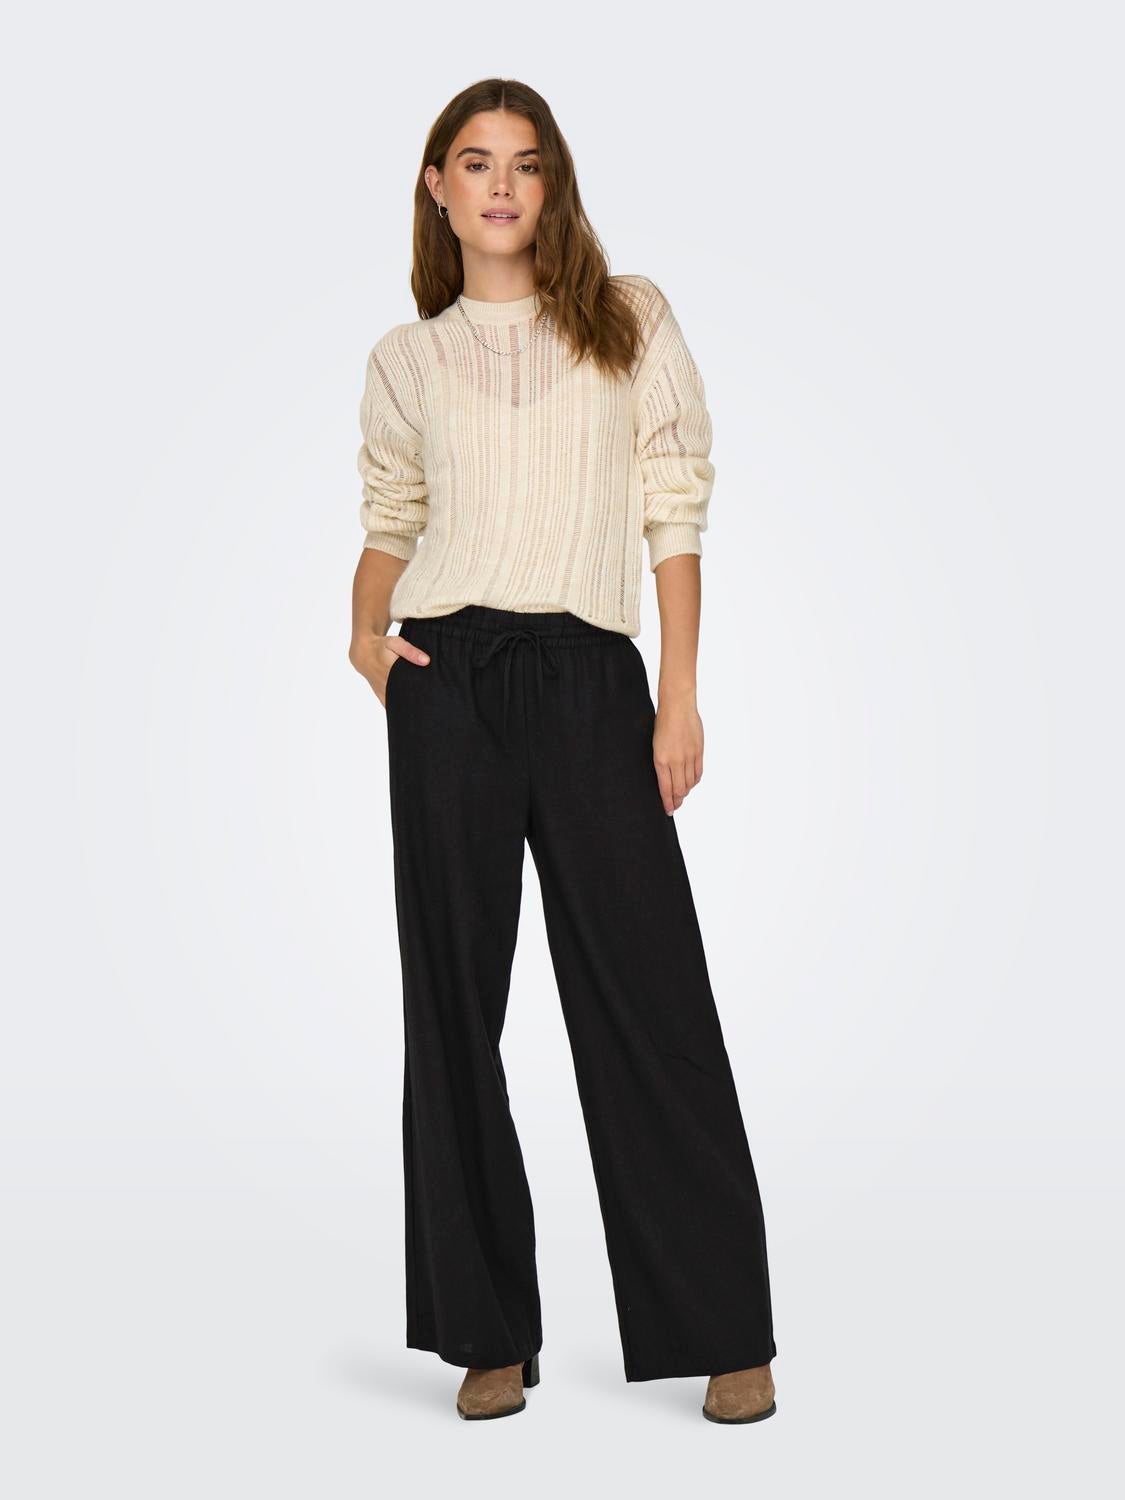 Classic trousers with high waist